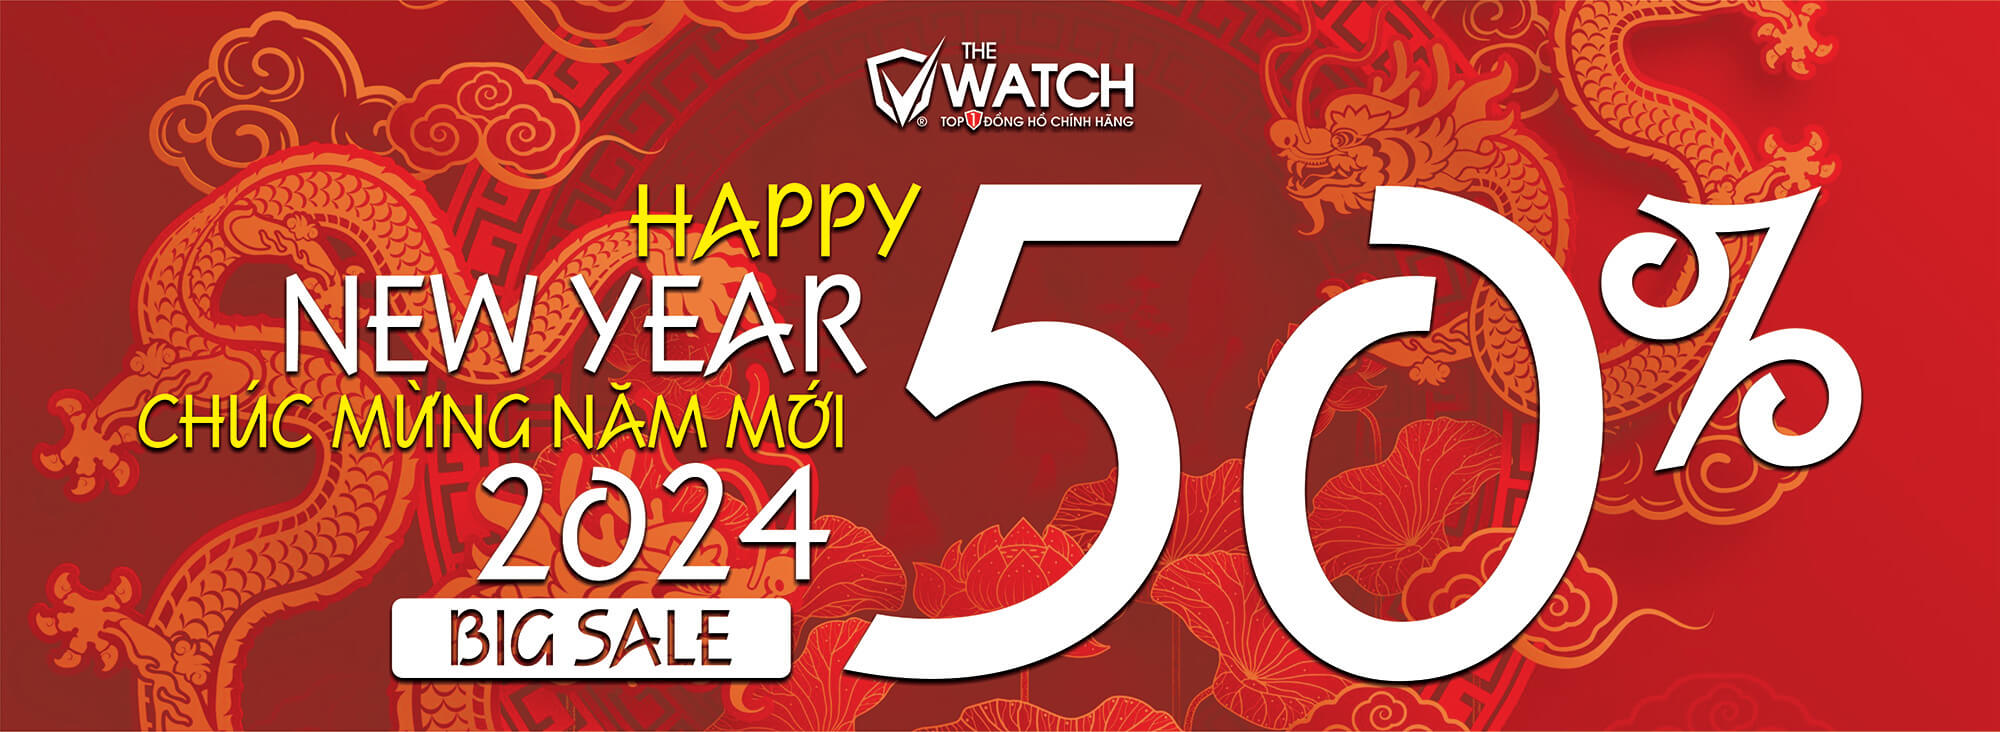 Dong ho the watch sale 50%